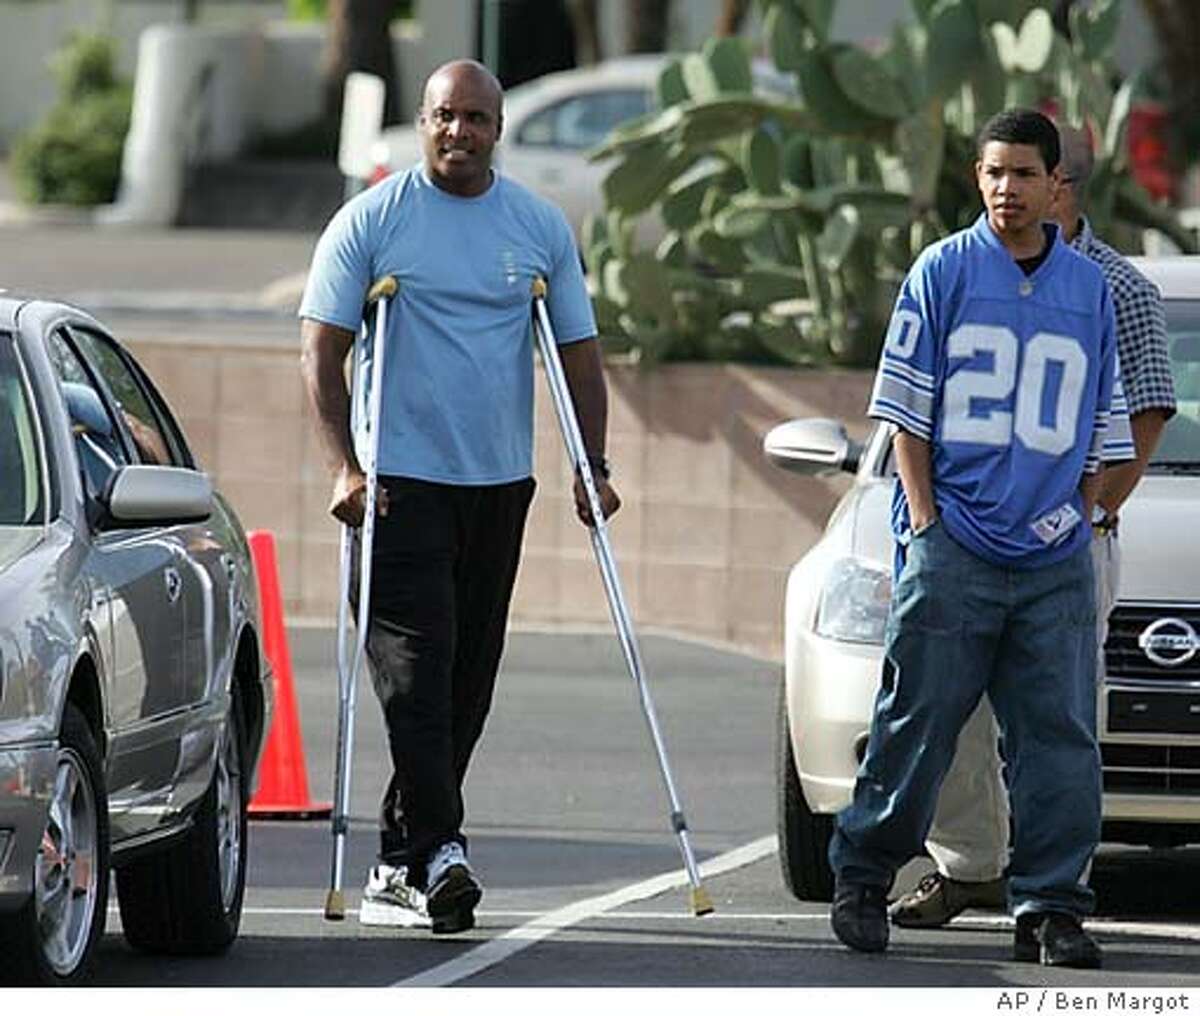 San Francisco Giants' Barry Bonds returns to spring training camp Tuesday, March 22, 2005, in Scottsdale, Ariz. Bonds has returned to Giants camp for rehabilitation since a second arthroscopic surgery on his right knee last week. At right is his son, Nikolai Bonds. (AP Photo/Ben Margot)